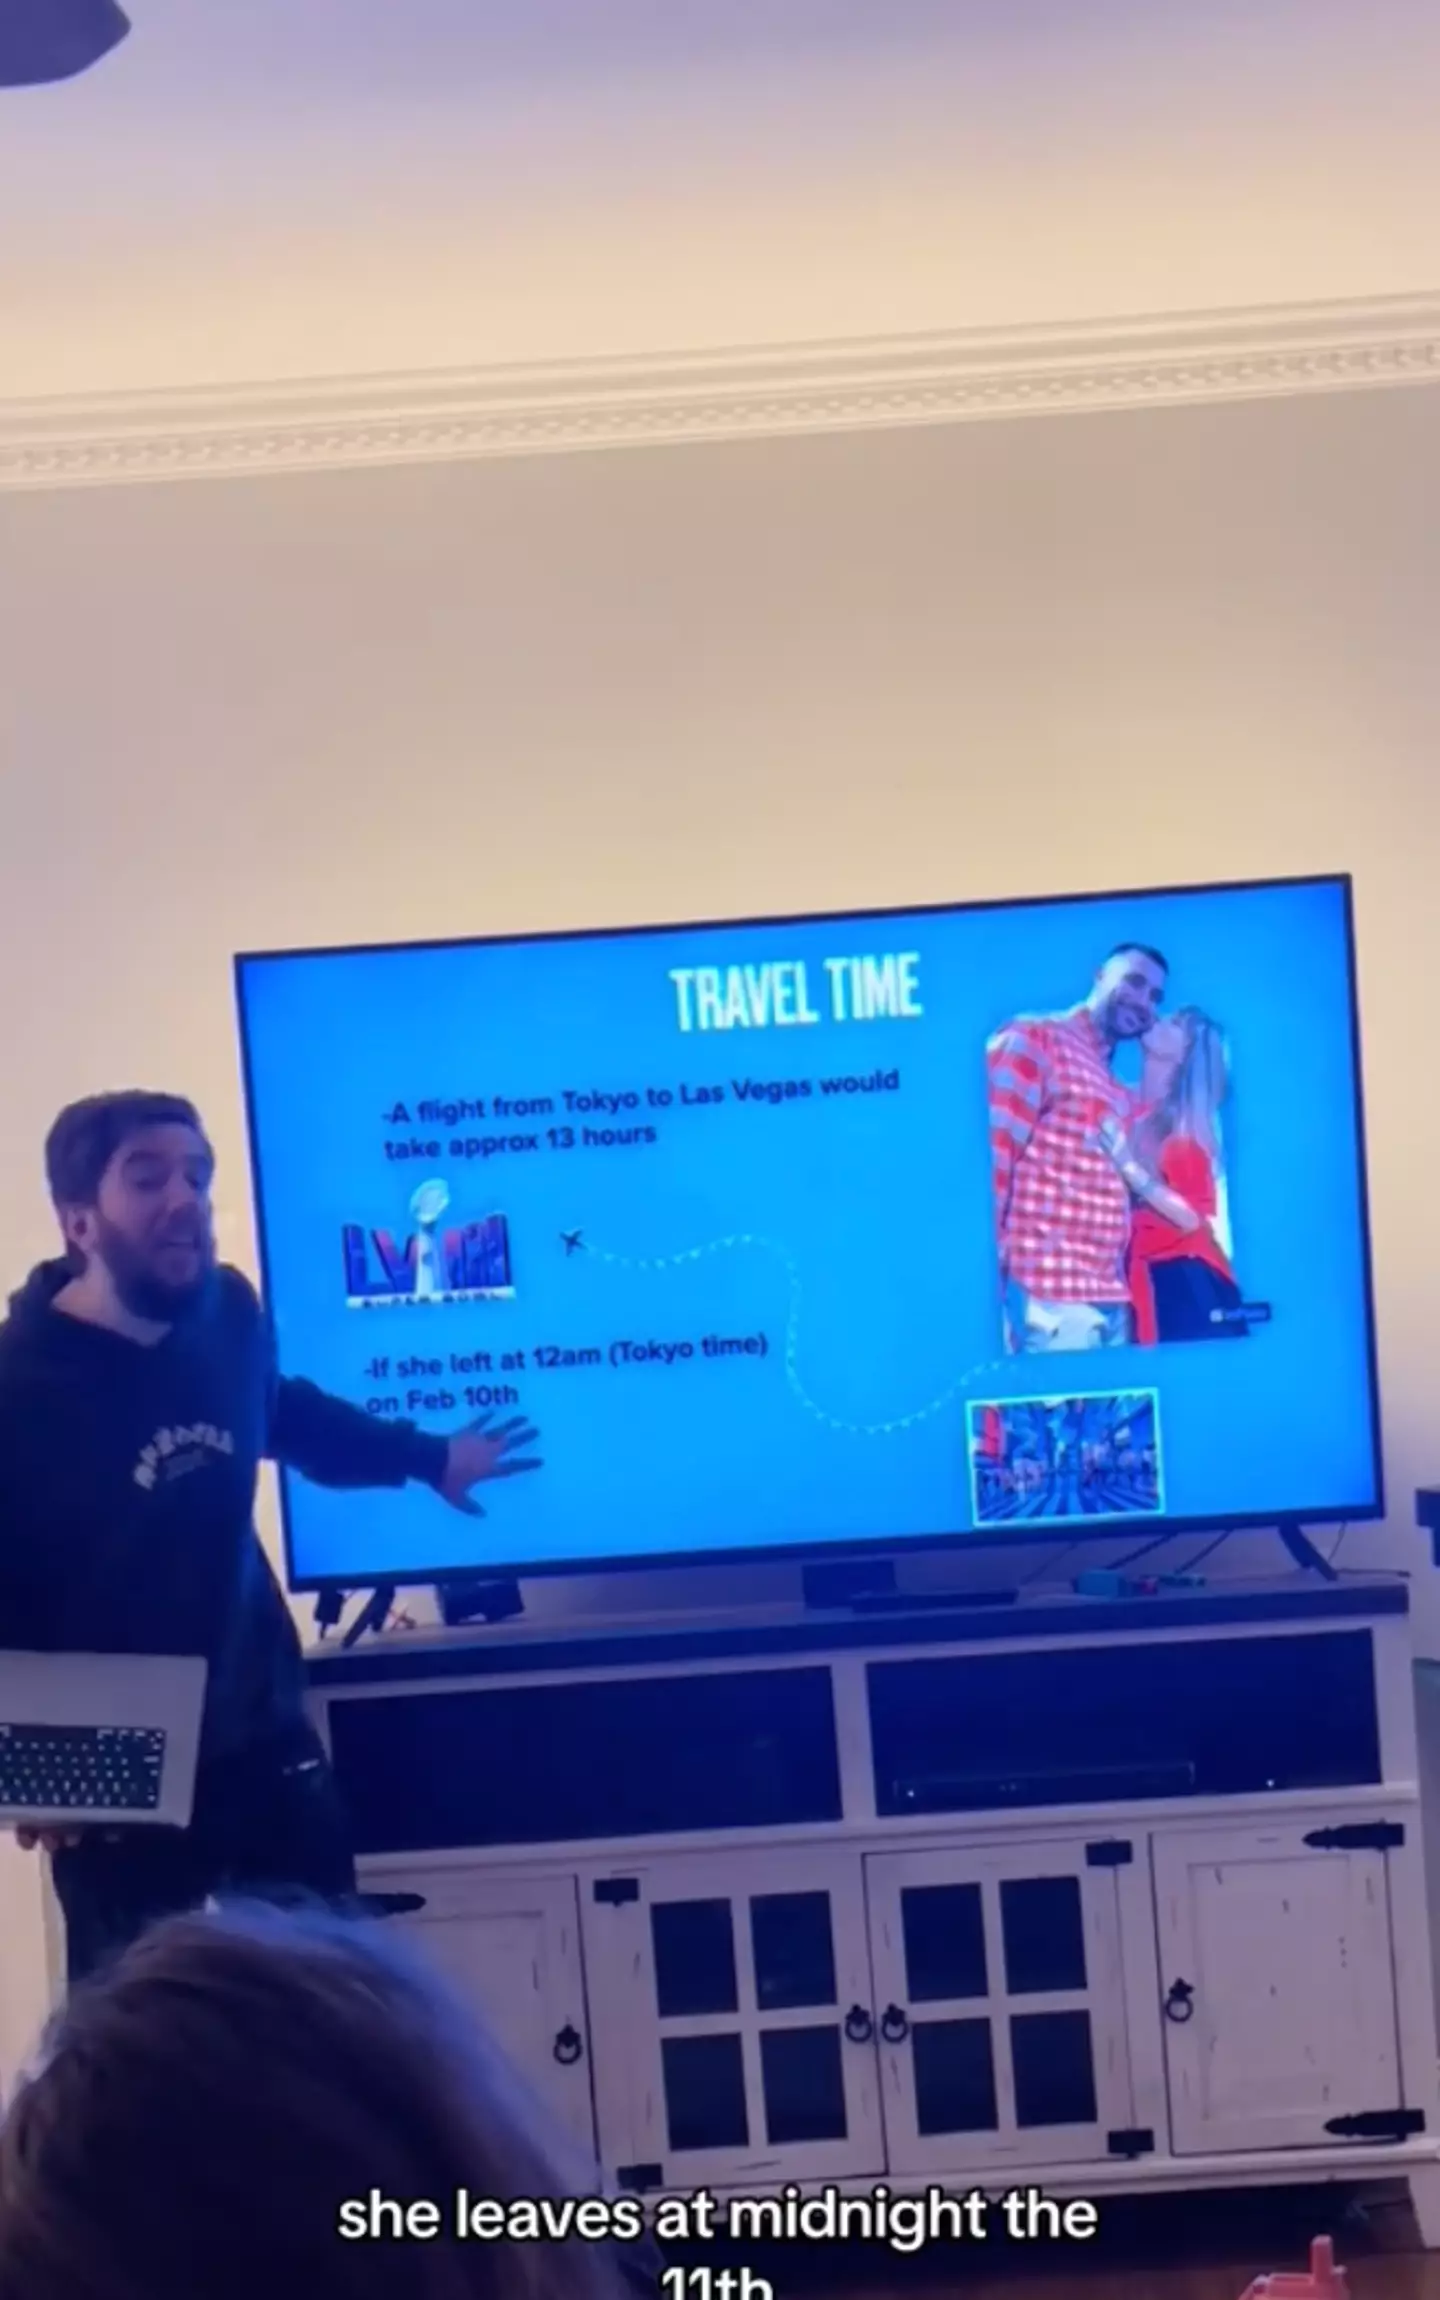 TikTok user Kyle crunched the numbers to see if Taylor Swift could make it to the Super Bowl.